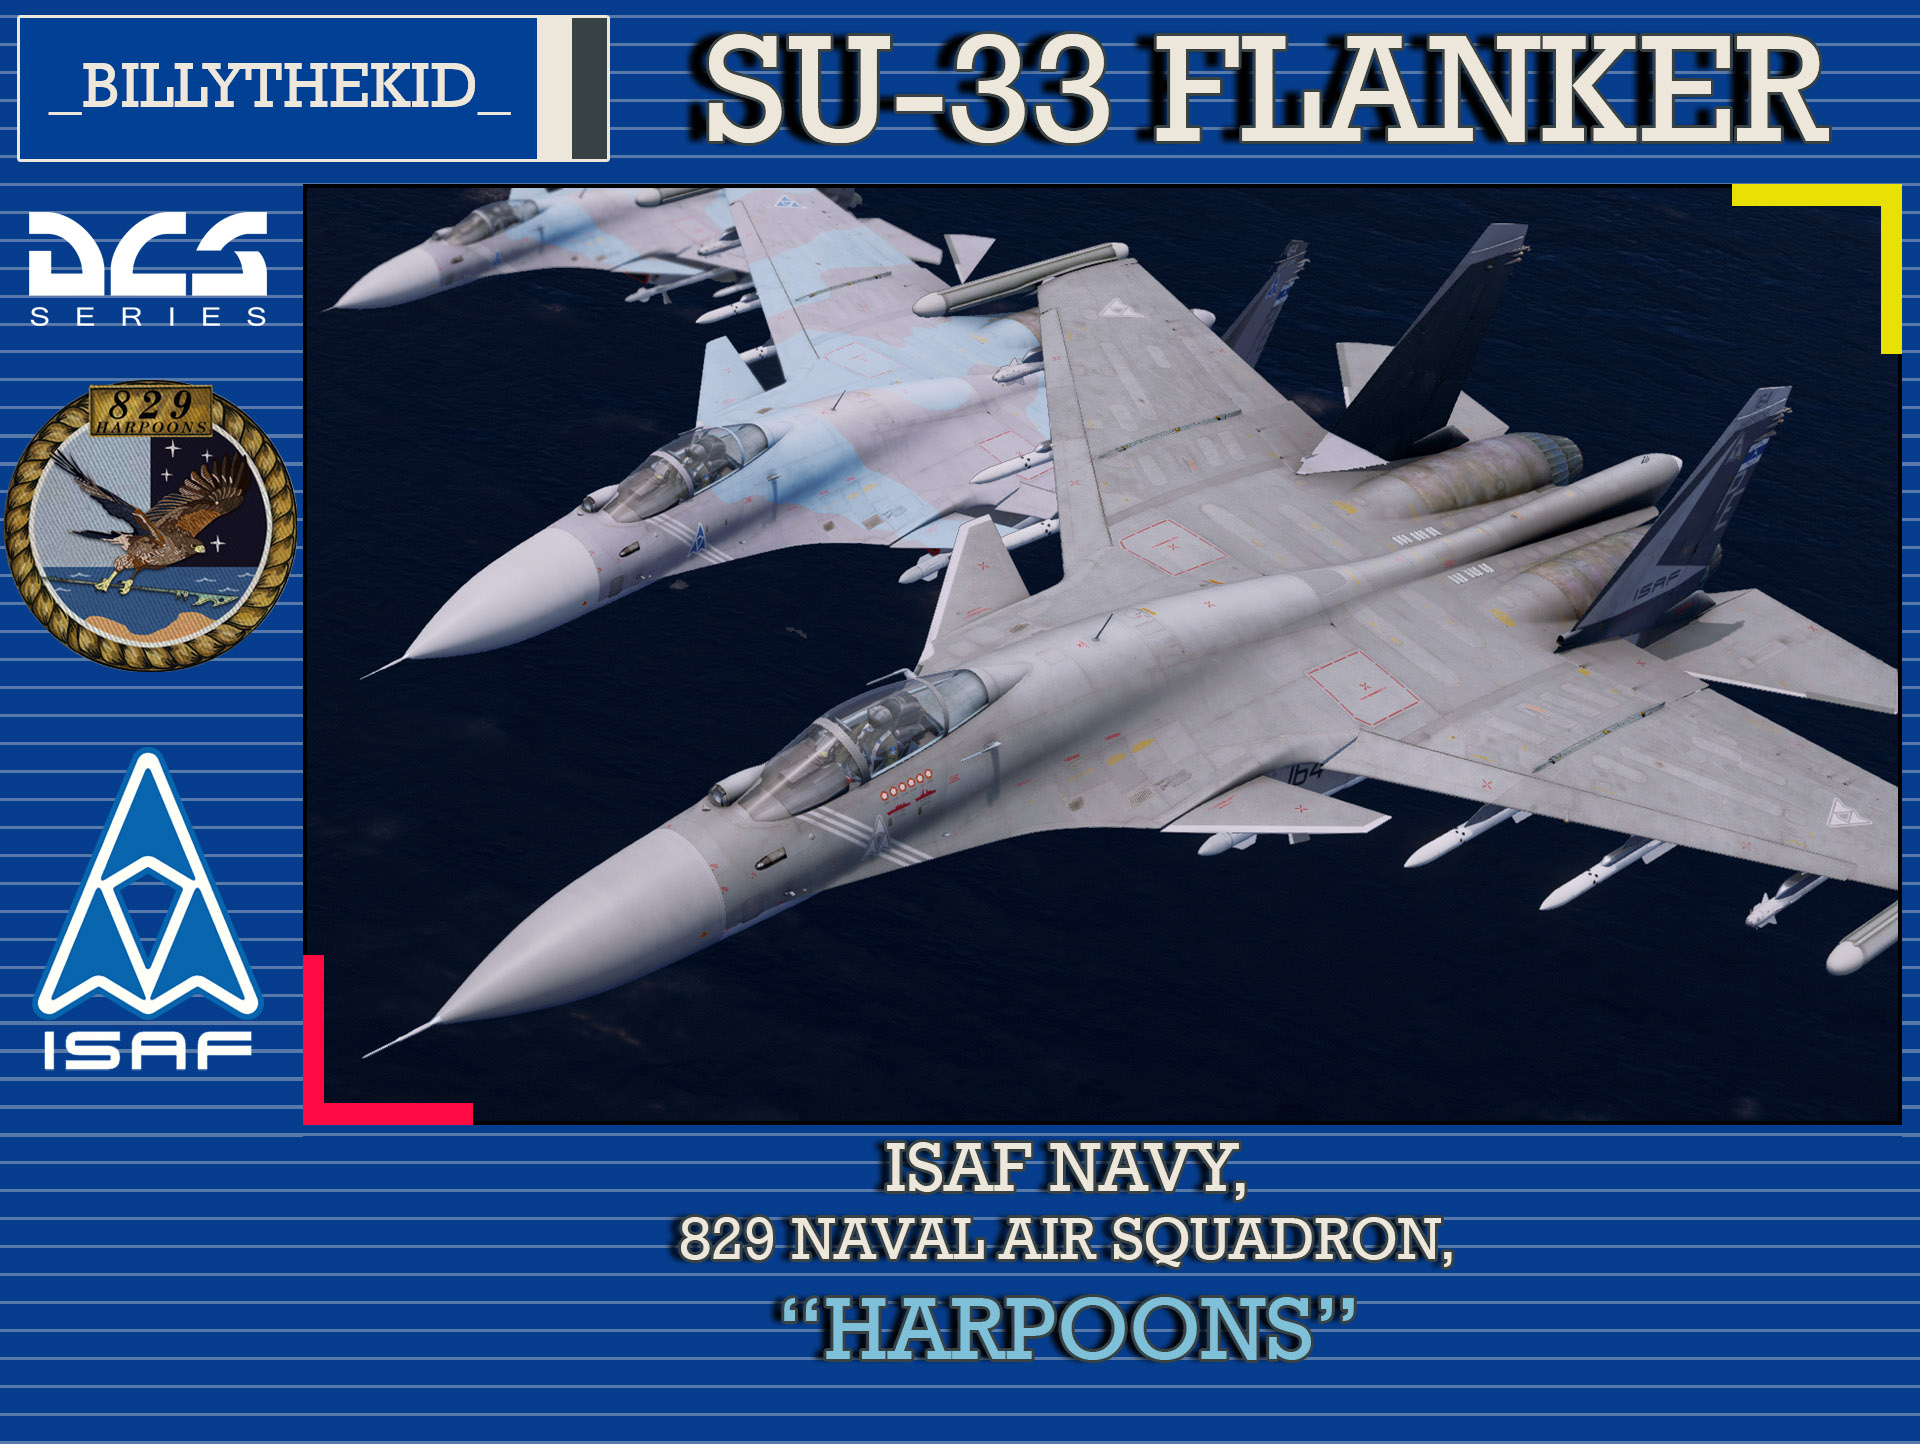 Ace Combat - ISAF Navy - 829 Naval Air Squadron "Harpoons" SU-33 Flanker-D